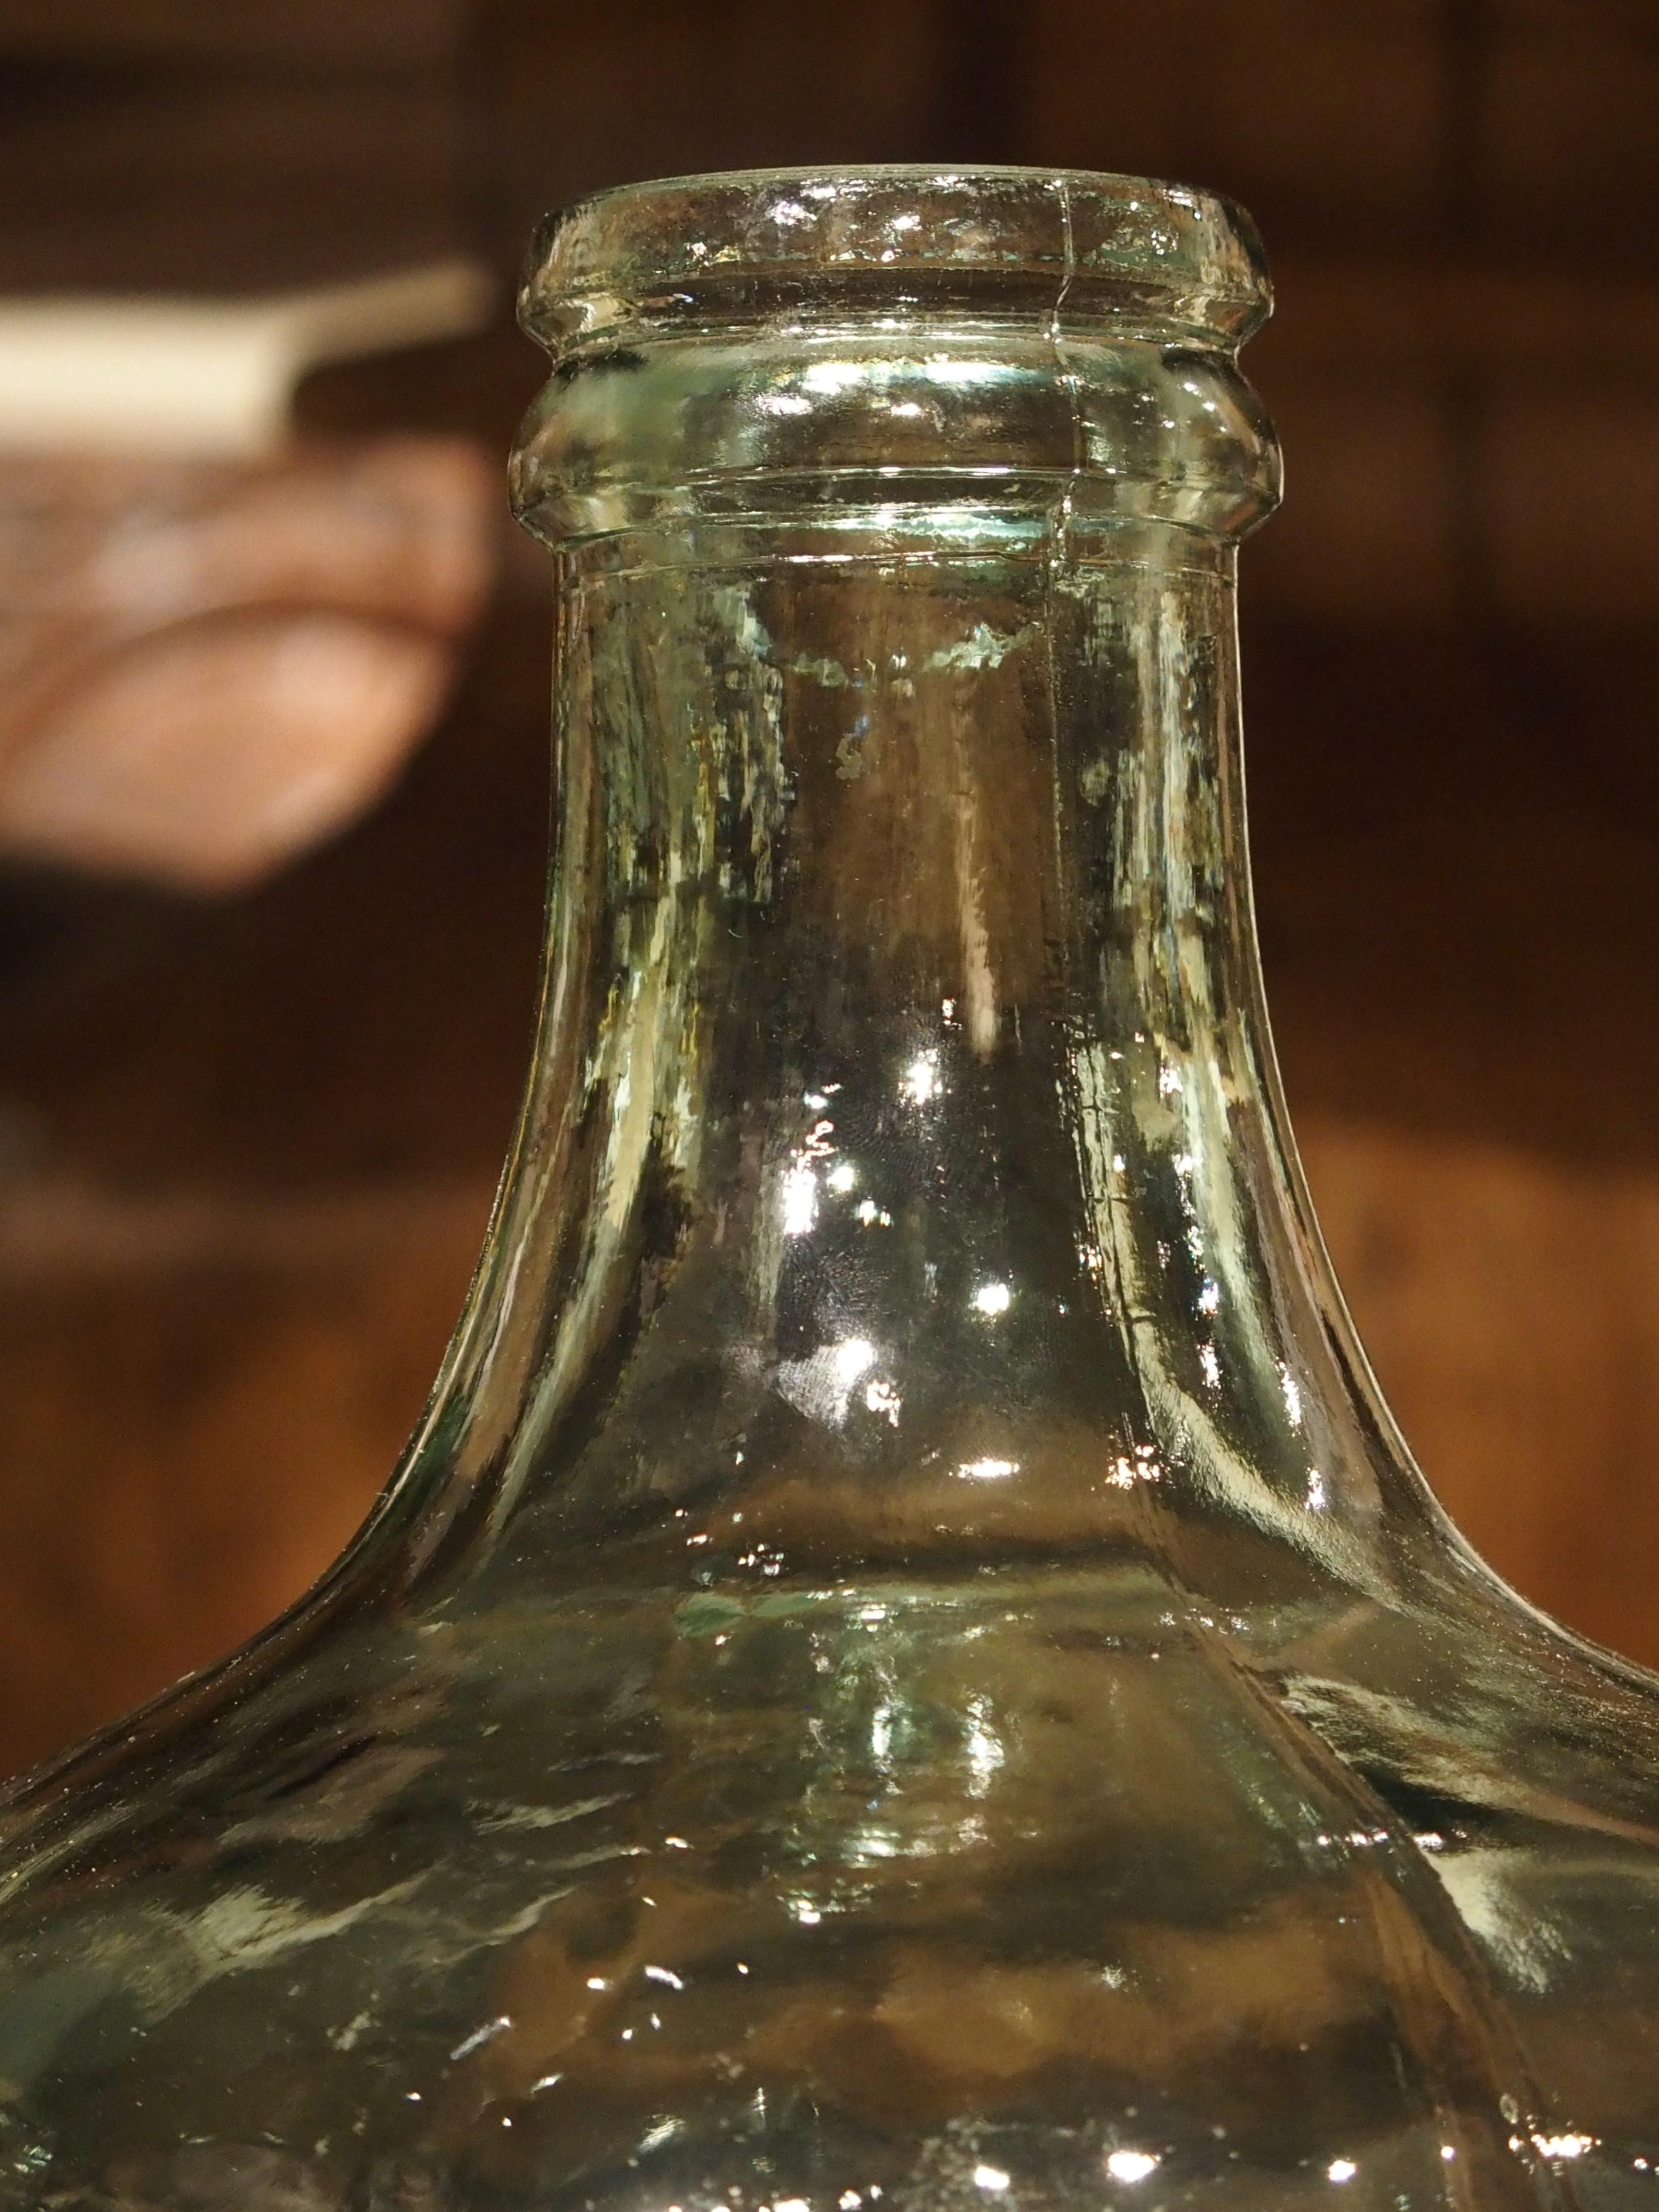 These continental European demijohns from the 20th century have green translucent glass that were embossed with a coat of arms above the word “Cabernet”. The wide mouths have an applied ring just below the mouth, and each was then finished to give a